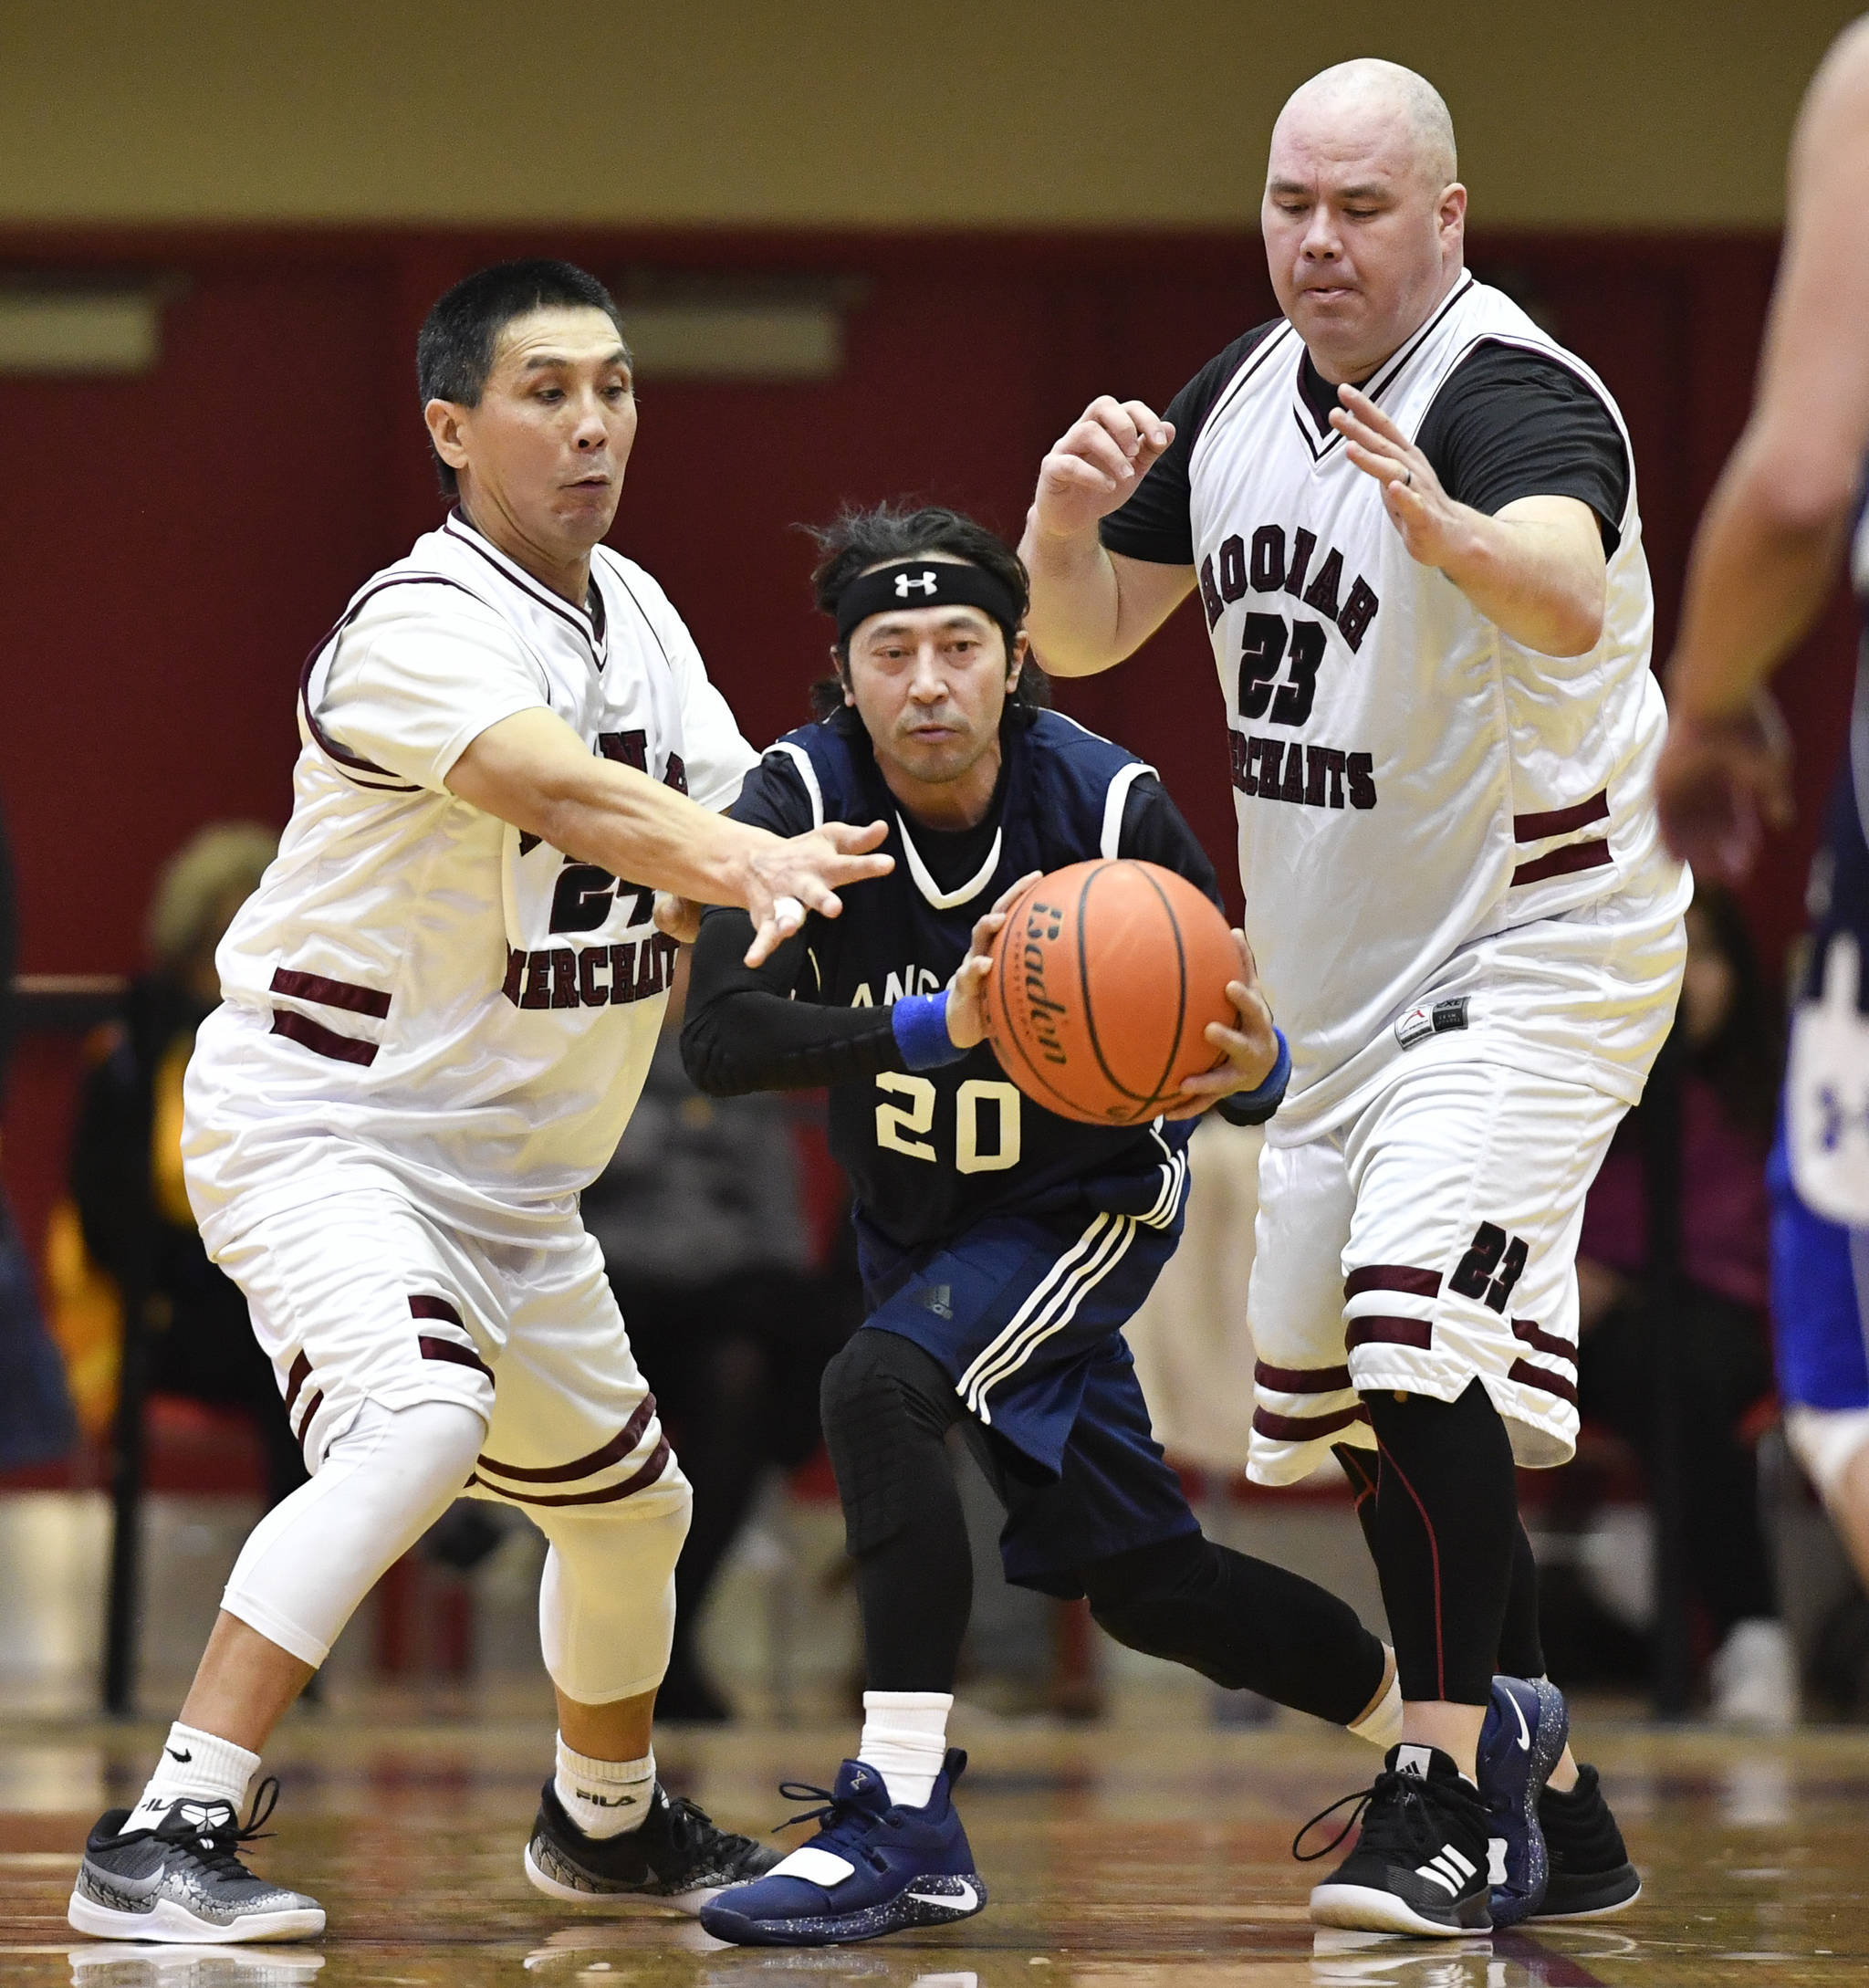 Angoon’s Sterling Bolima, center, is trapped by Hoonah’s Ken Willard Jr., left, and Andy Gray in a masters bracket game at the Juneau Lions Club 73rd Annual Gold Medal Basketball Tournament at Juneau-Douglas High School: Yadaa.at Kalé on Wednesday, March 20, 2019. Hoonah won 75-44. (Michael Penn | Juneau Empire)